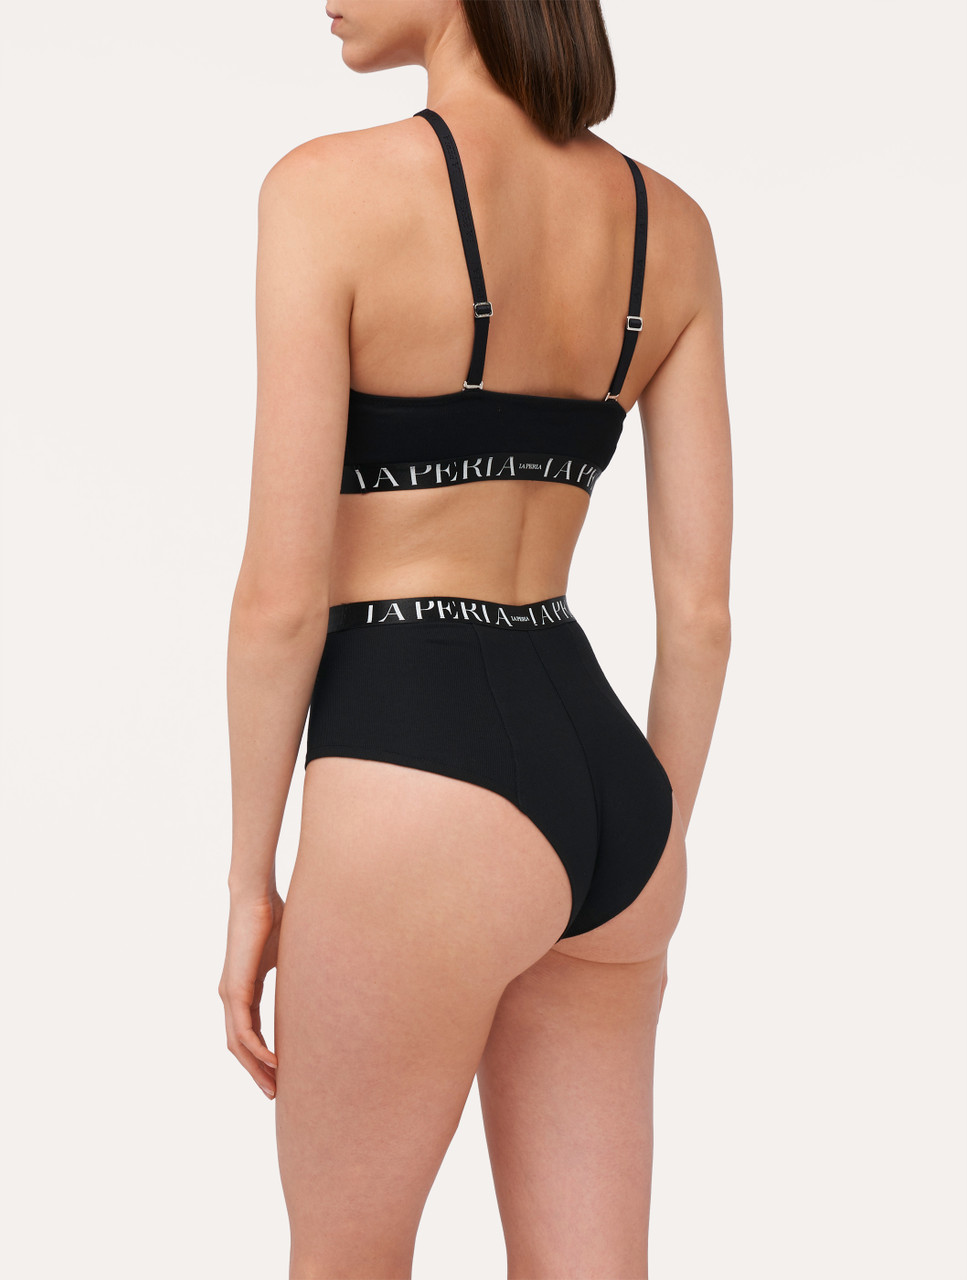 High-waisted Briefs in black stretch tulle